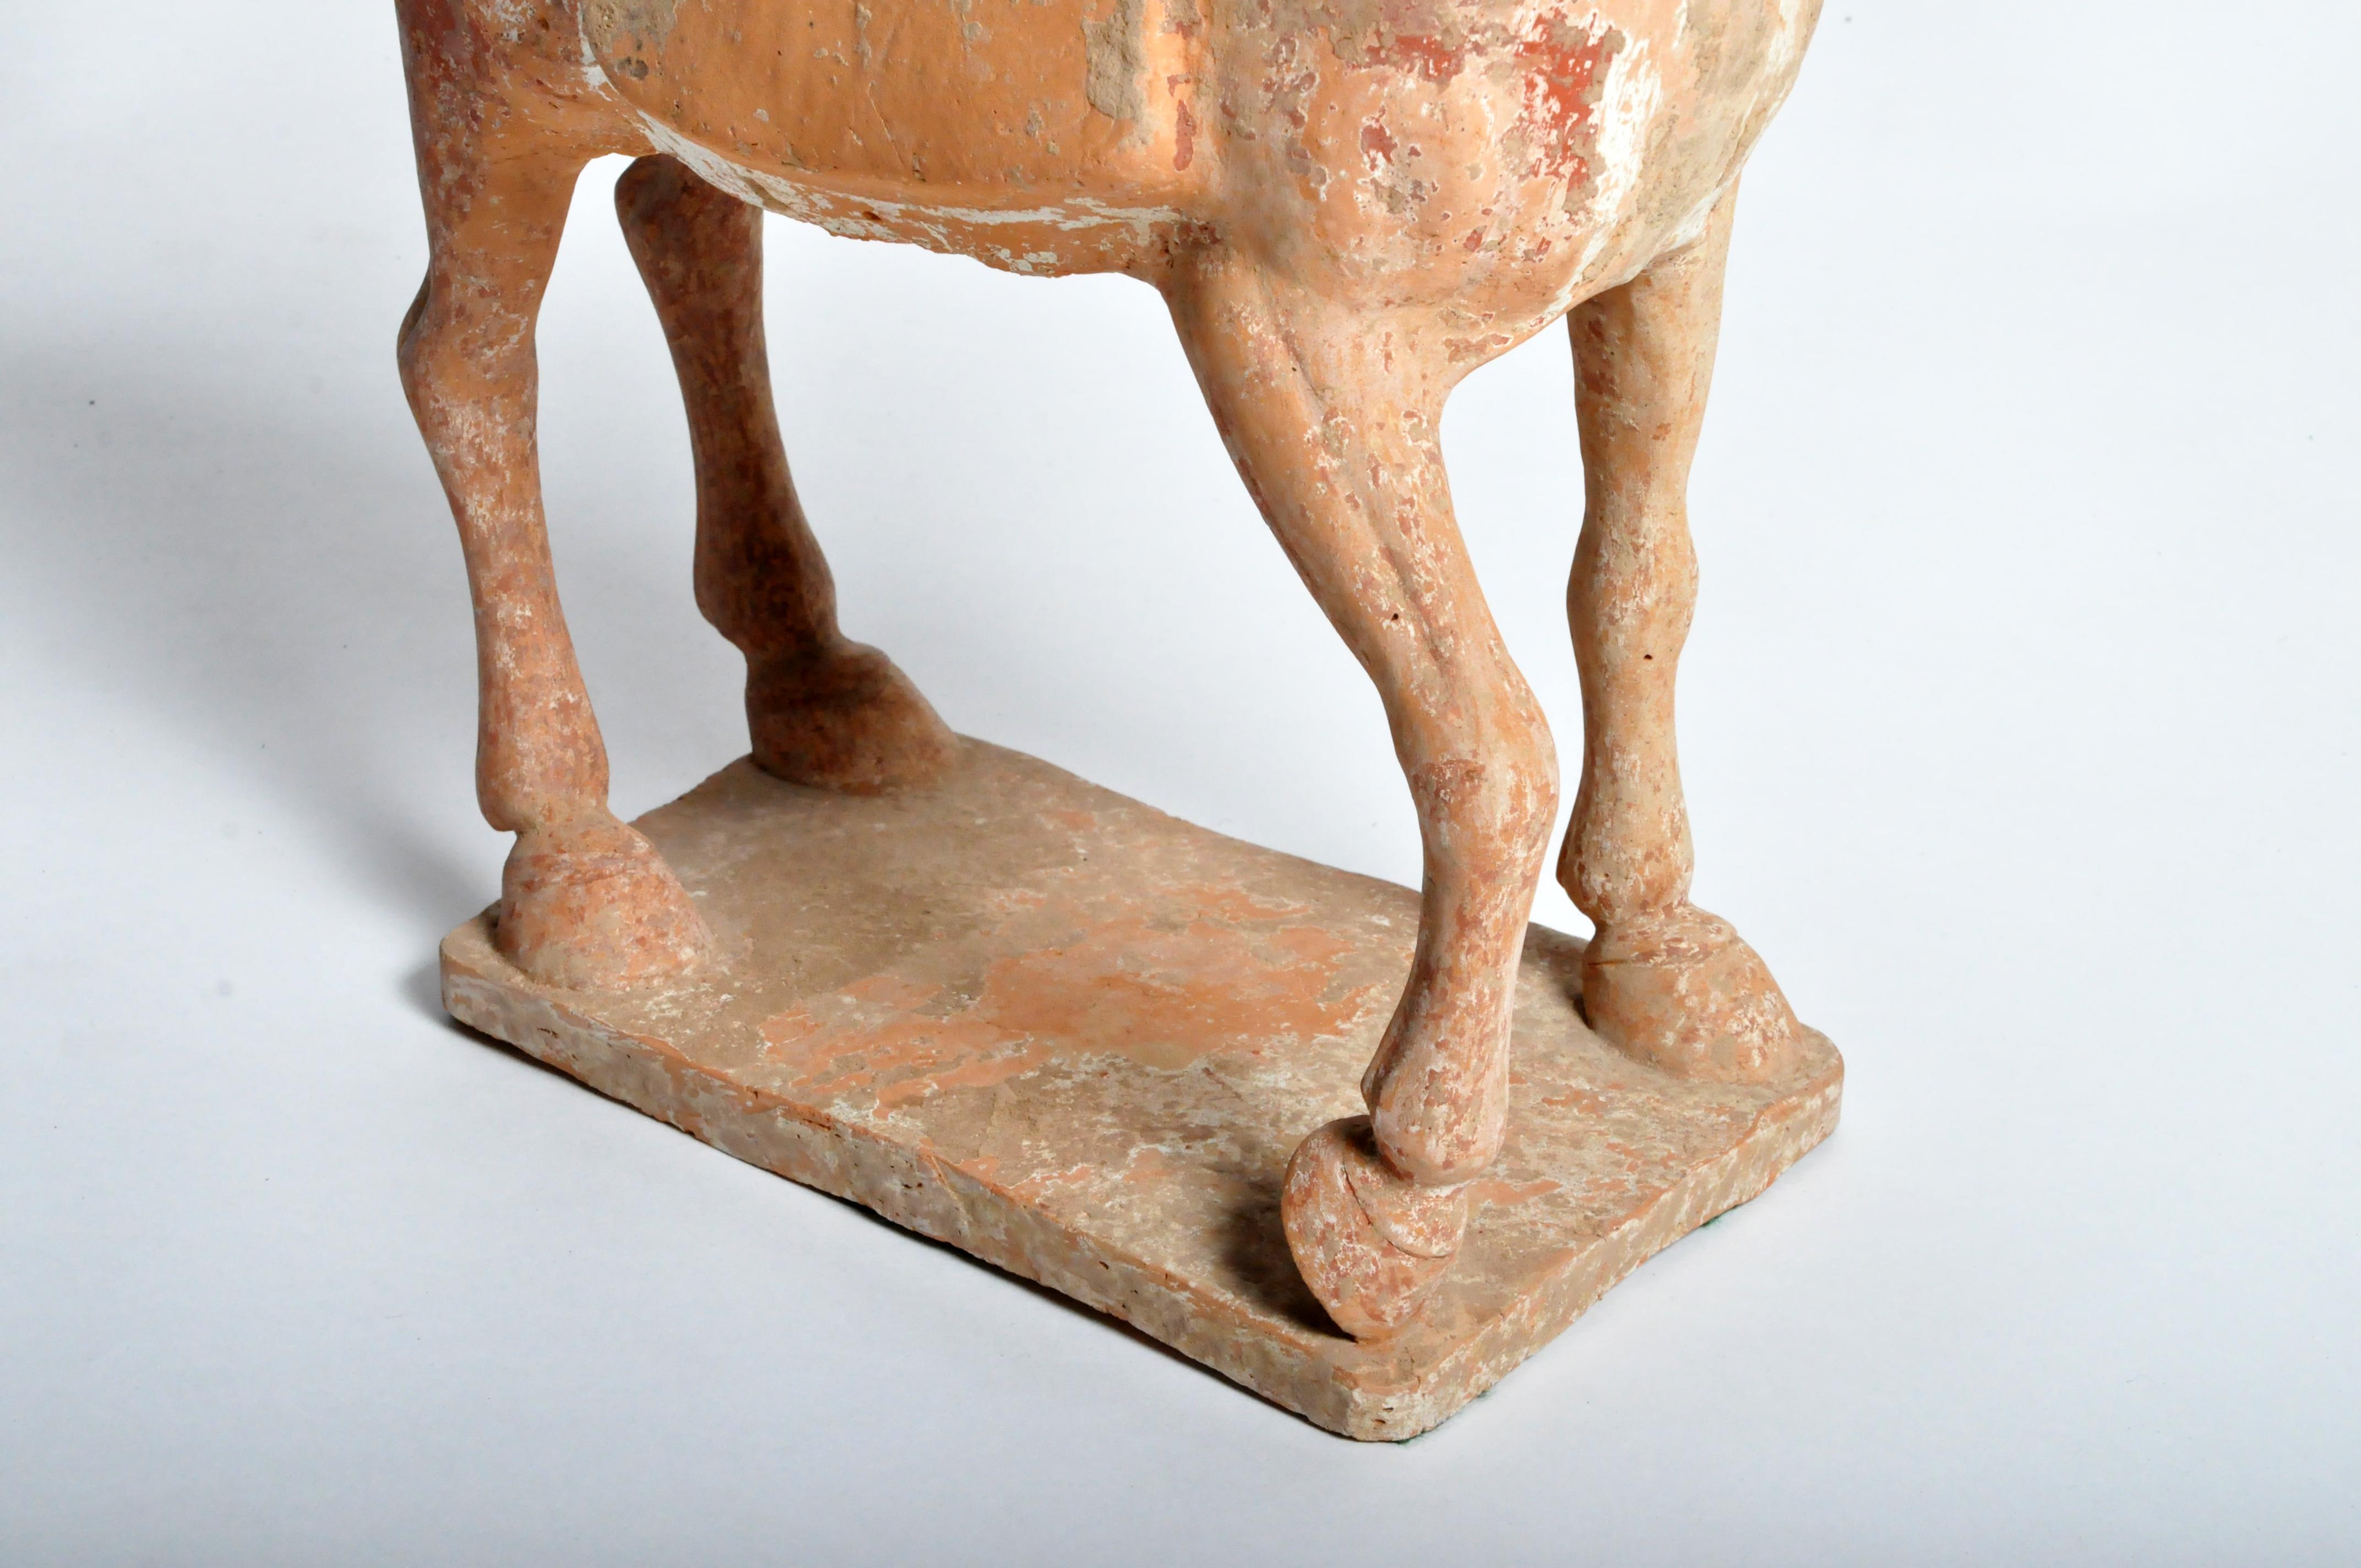 Six Dynasties Period Figure of a Horse 7